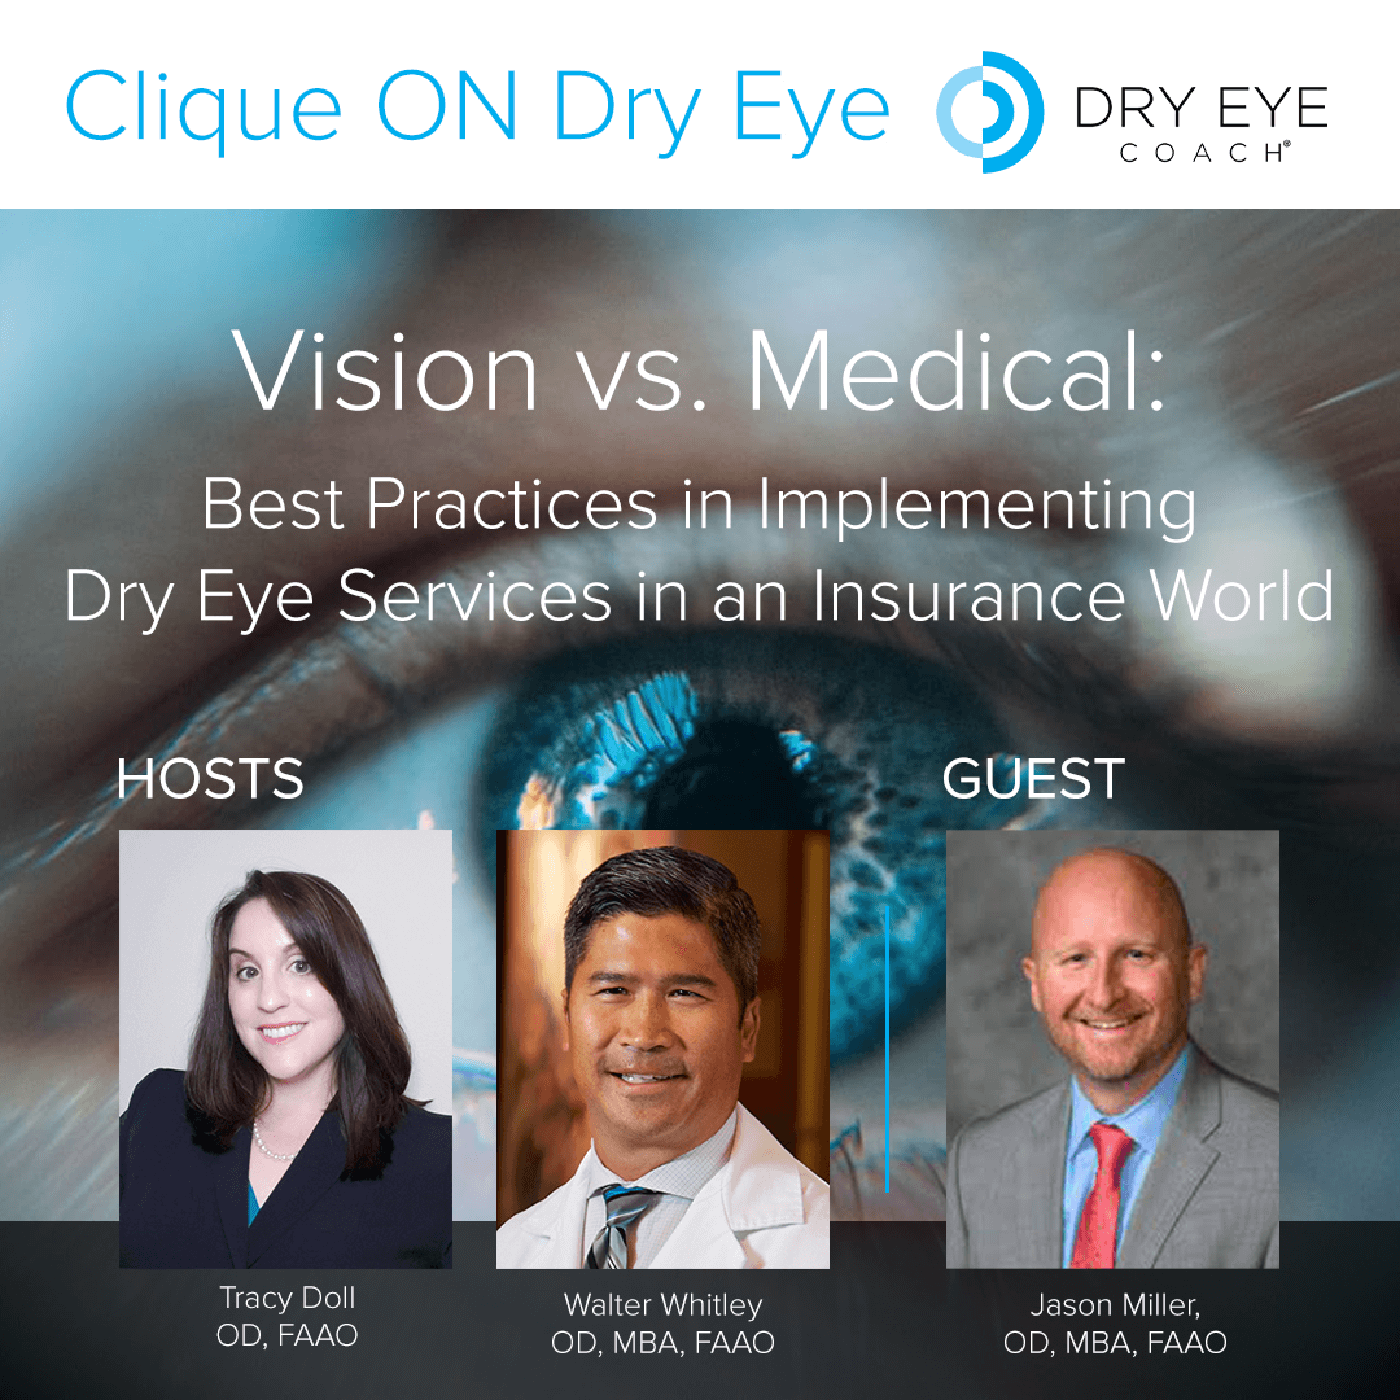 Vision vs. Medical: Best Practices in Implementing Dry Eye Services in an Insurance World